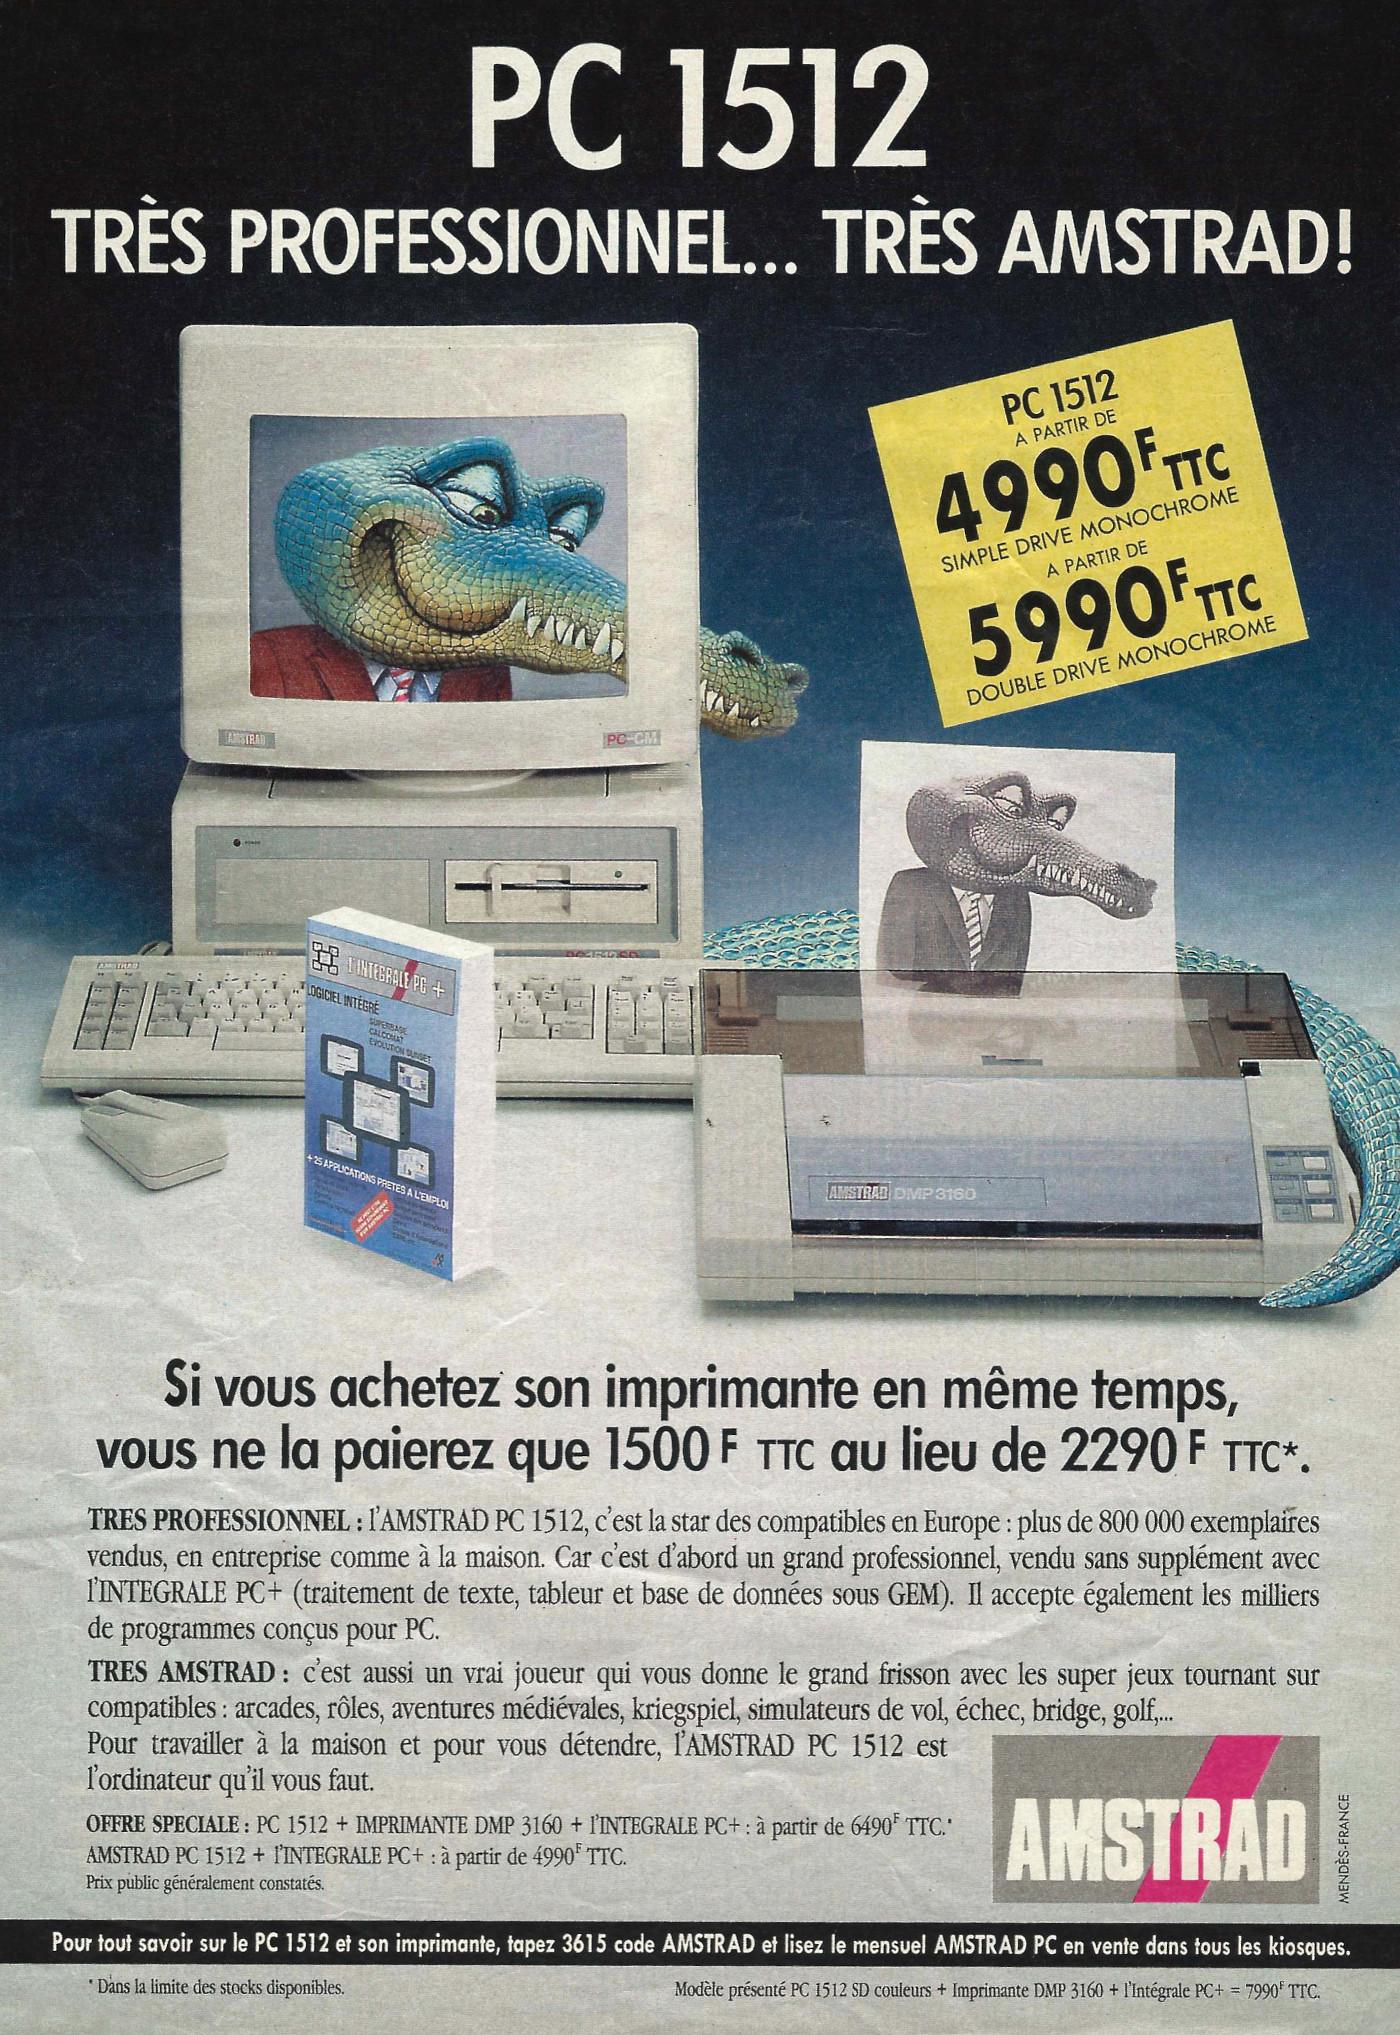 An Amstrad advert placed in a French magazine, showing the PC 1512 in a bundle offer with a printer for 1500F instead of 2290F, which is about a £79 discount, or £250 in 2024. The advert also claims that more than 800,000 1512s had been sold to businesses and home users.